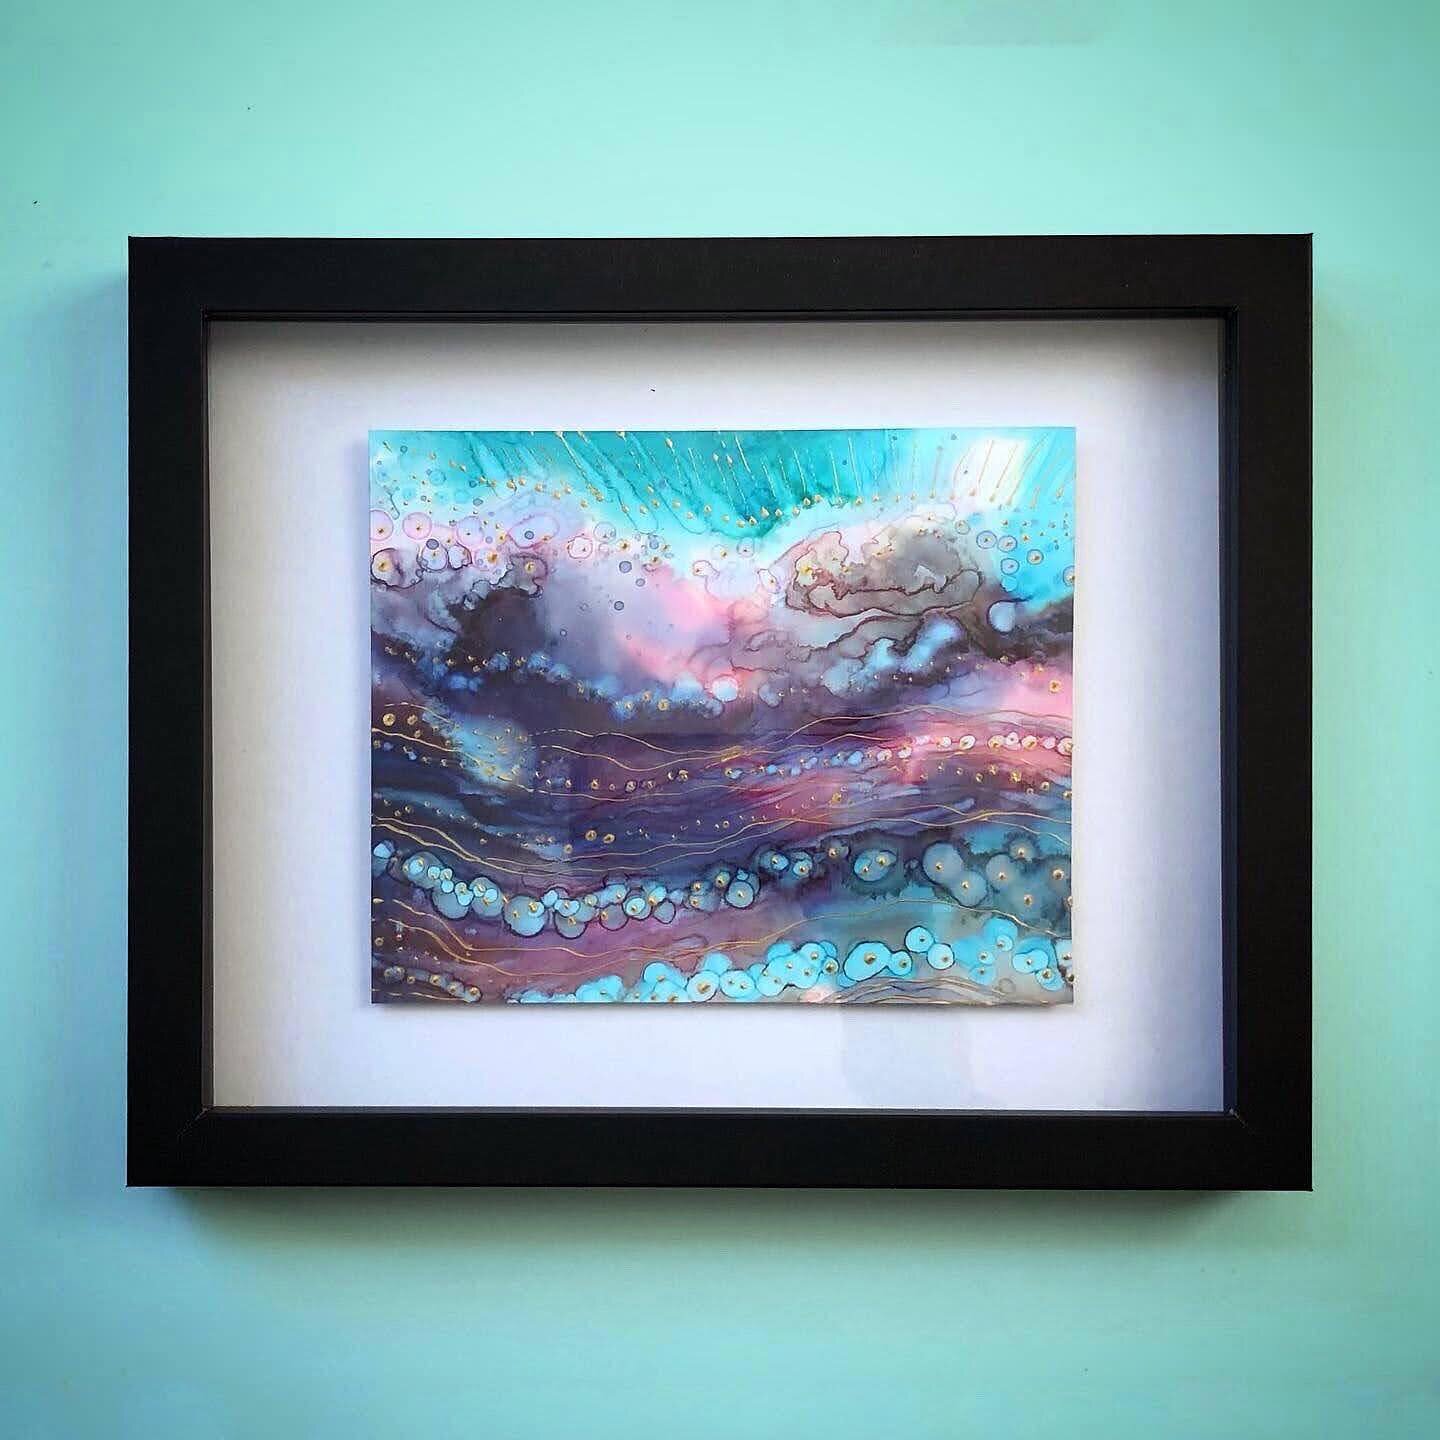 &lsquo;Hope&rsquo; - floating piece in an 8x10 shadowbox. Can be removed on request and sold flat. Swipe to see the textures gold details. It was hard to shoot this one with the reflection, but in person this one has raised texture and gorgeous blend